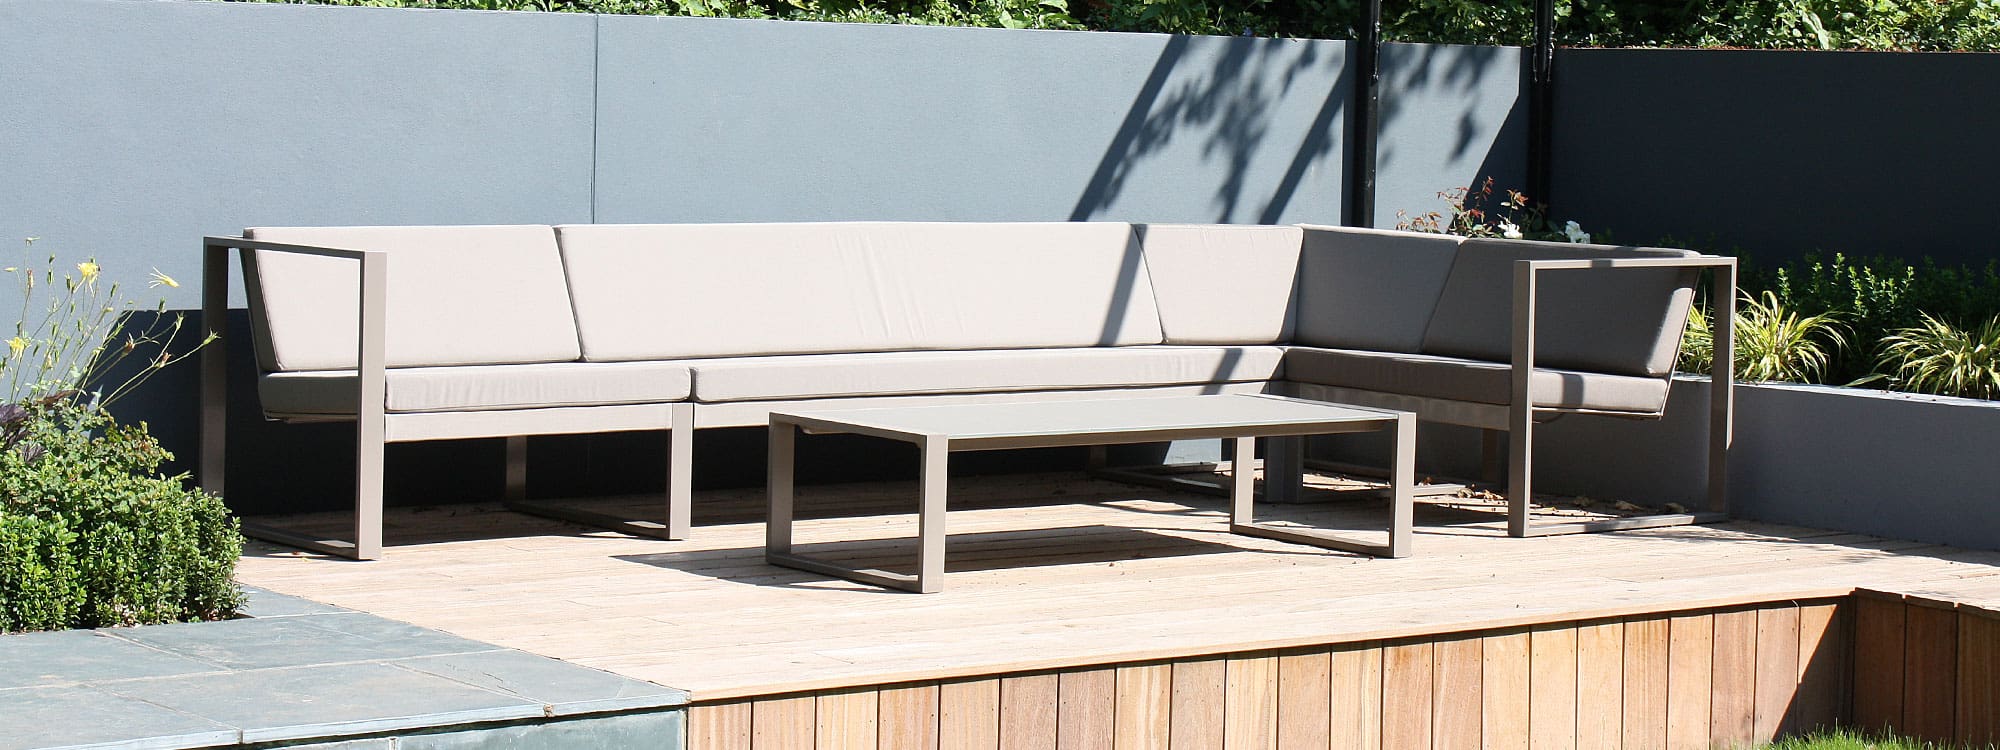 Image of FueraDentro Cima Lounge modern garden corner sofa in taupe on sunny wooden decking